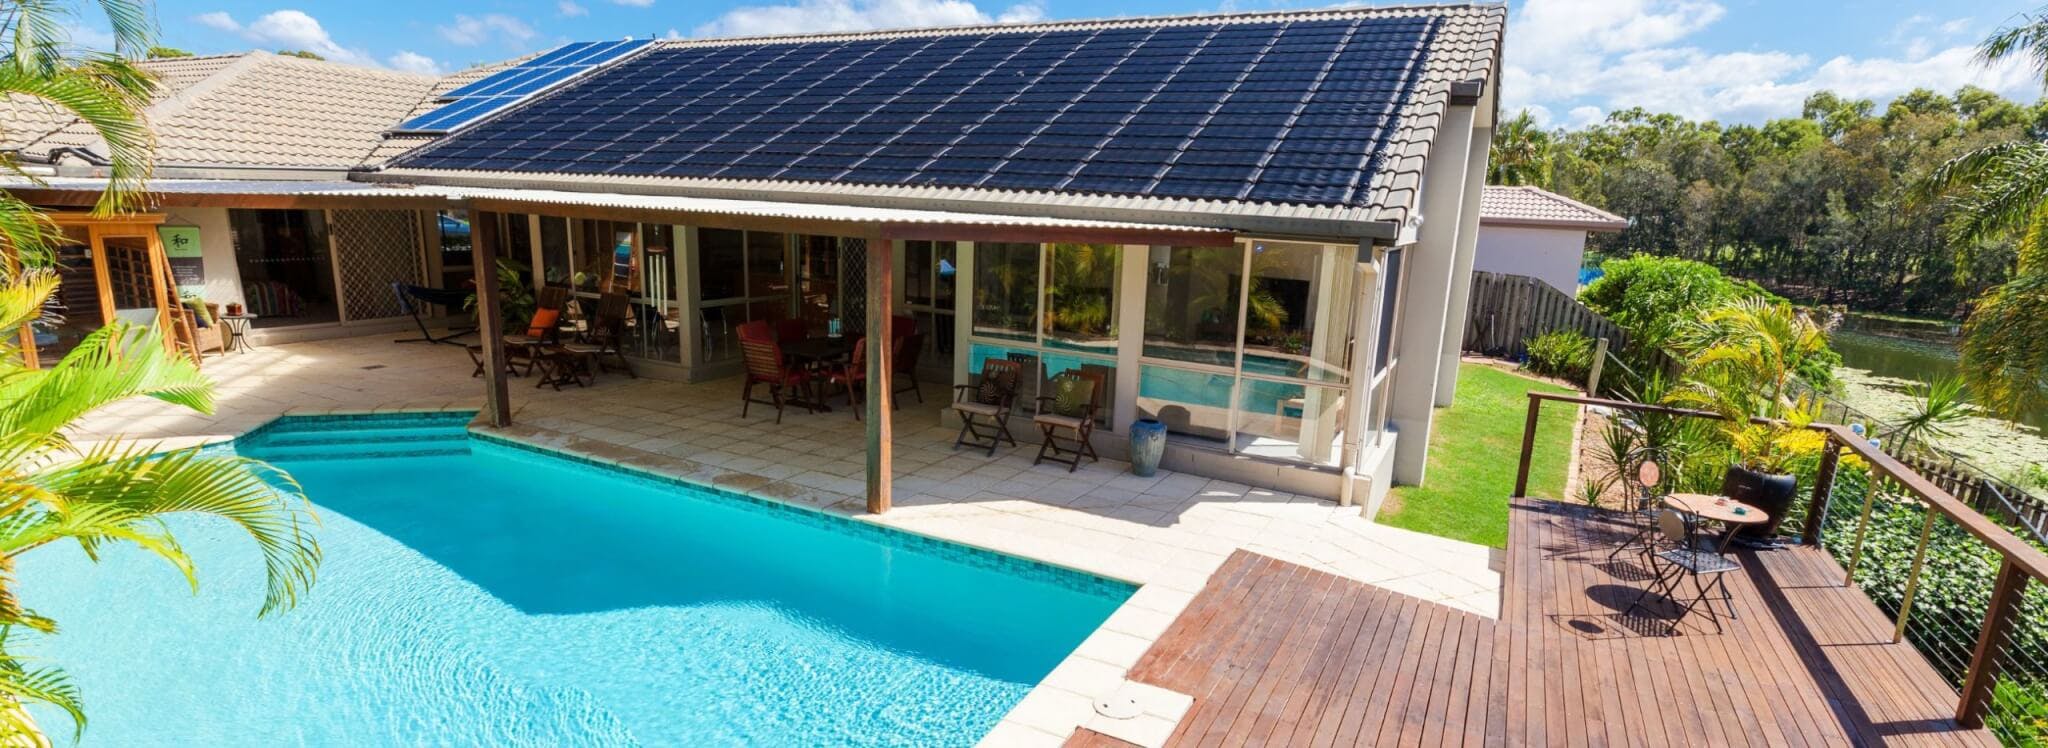 house with solar panels and pool